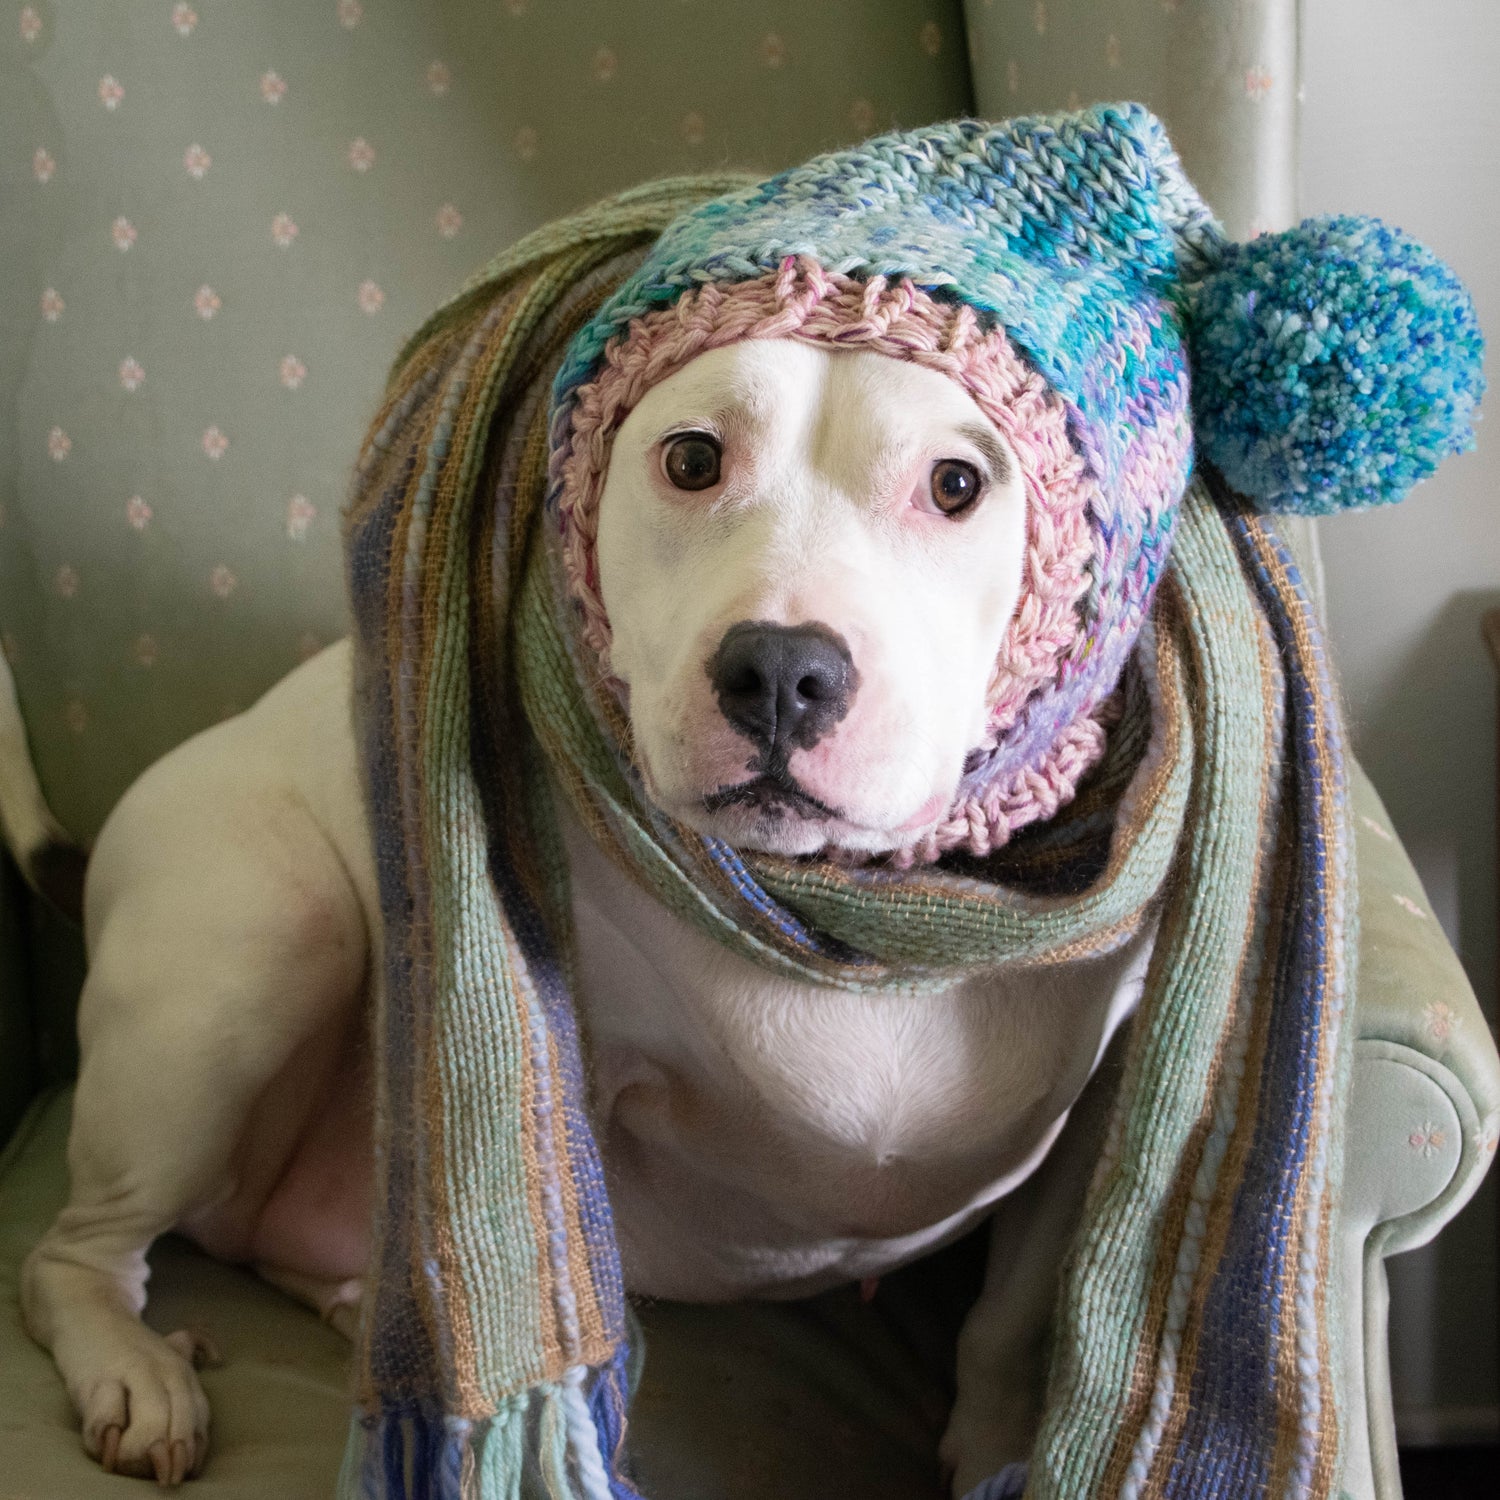 Pixie, a white pitbull, wearing a knit hat with a giant pom-pom and a woven scarf.